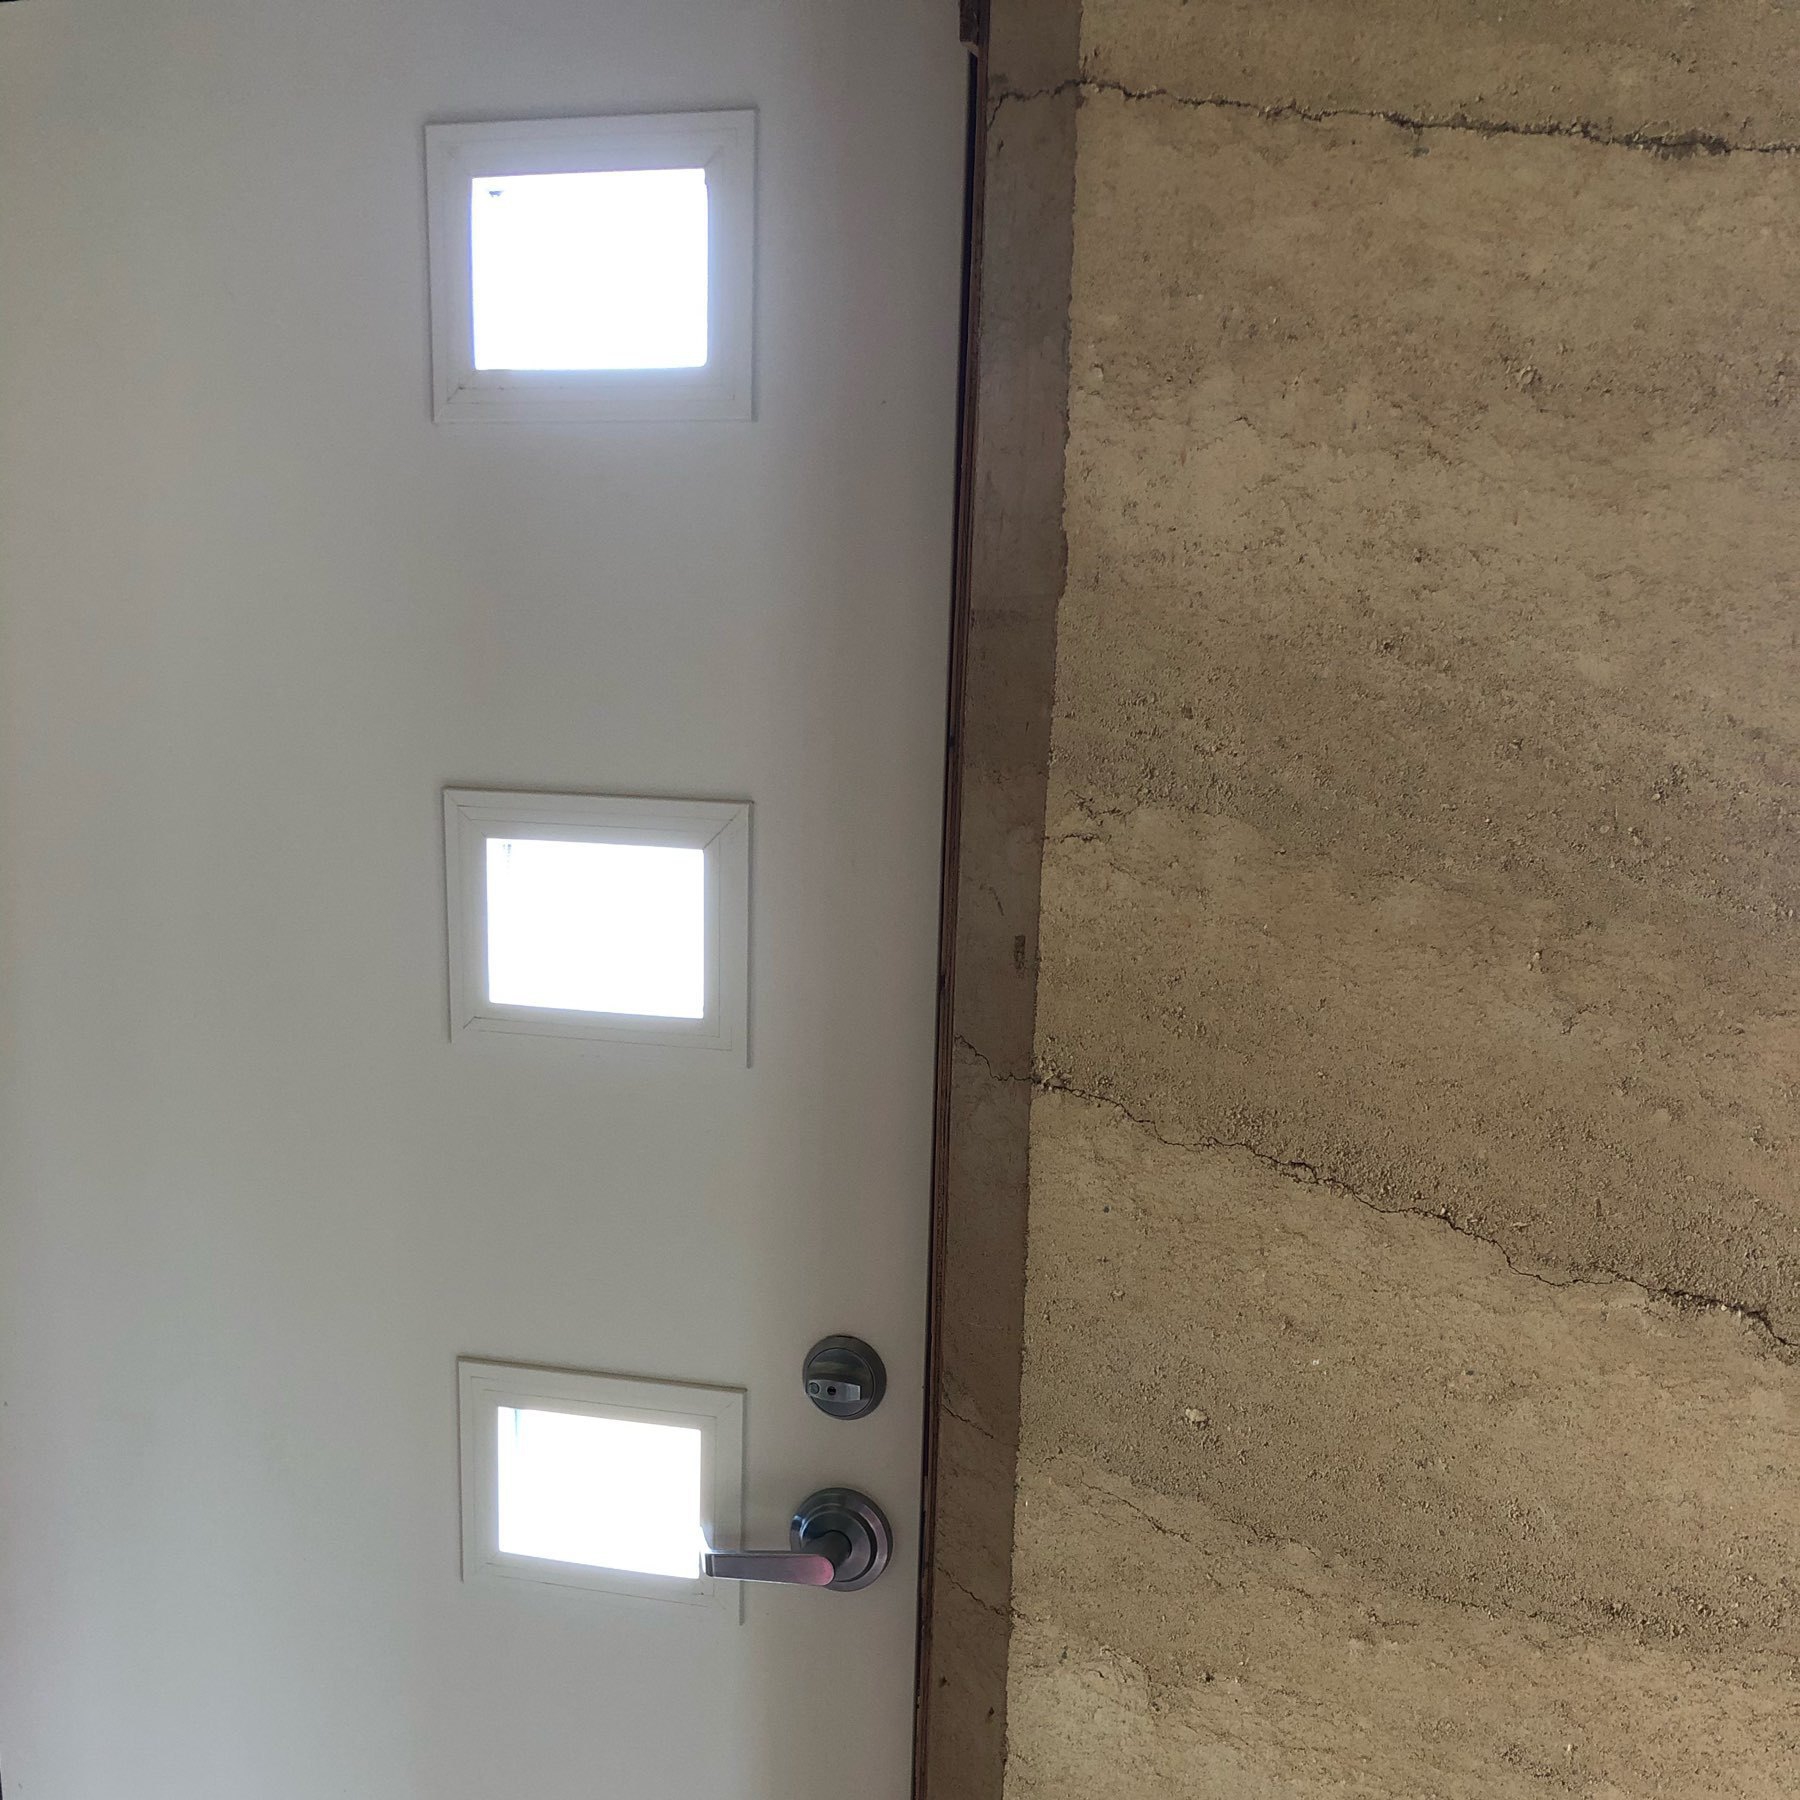 three small windows in a door next to a rammed earth wall